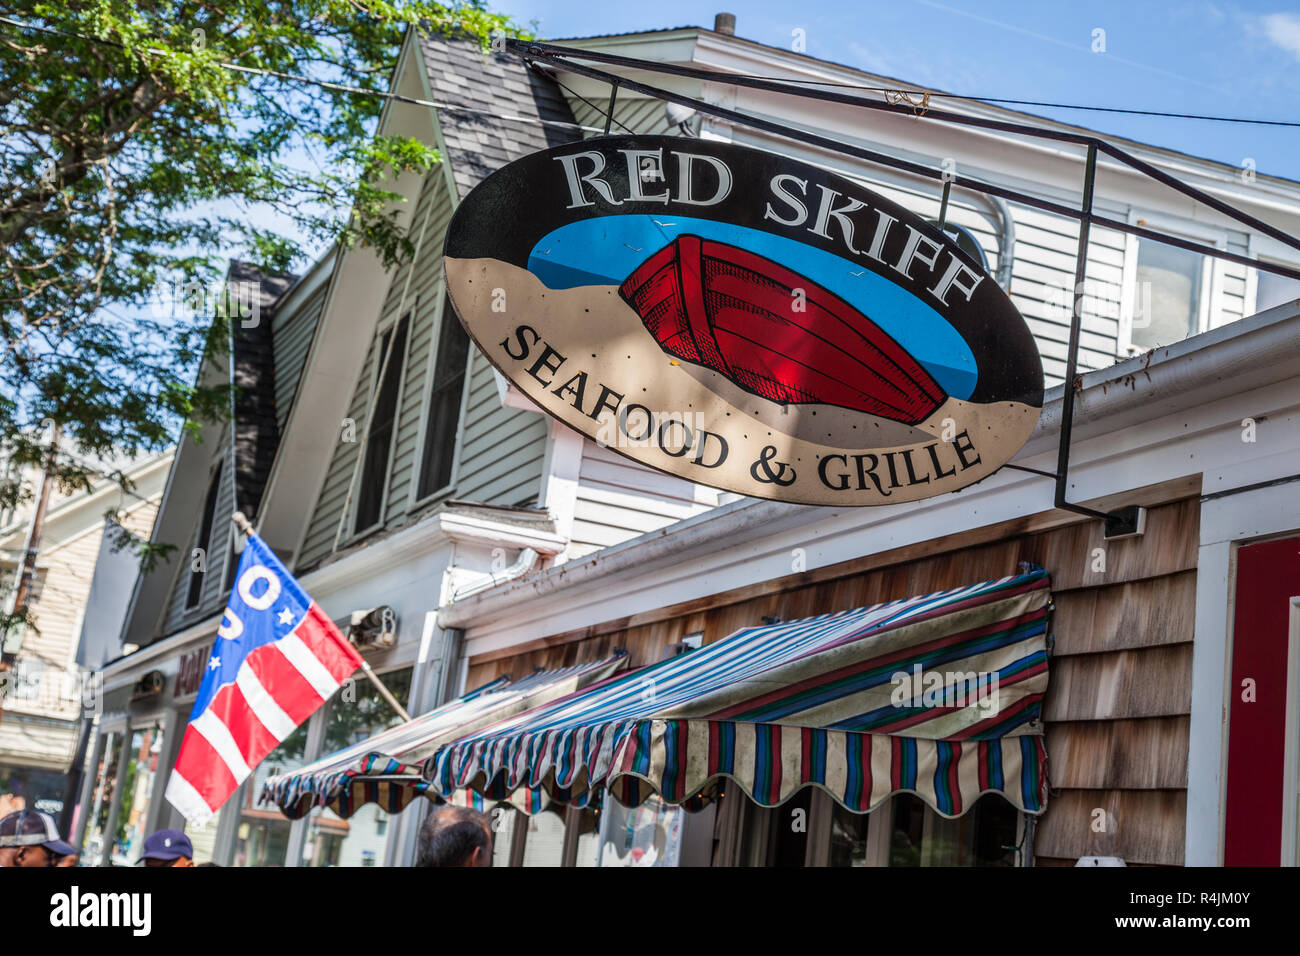 The Red Skiff Seafood Grill restaurant in Rockport, MA Stock Photo